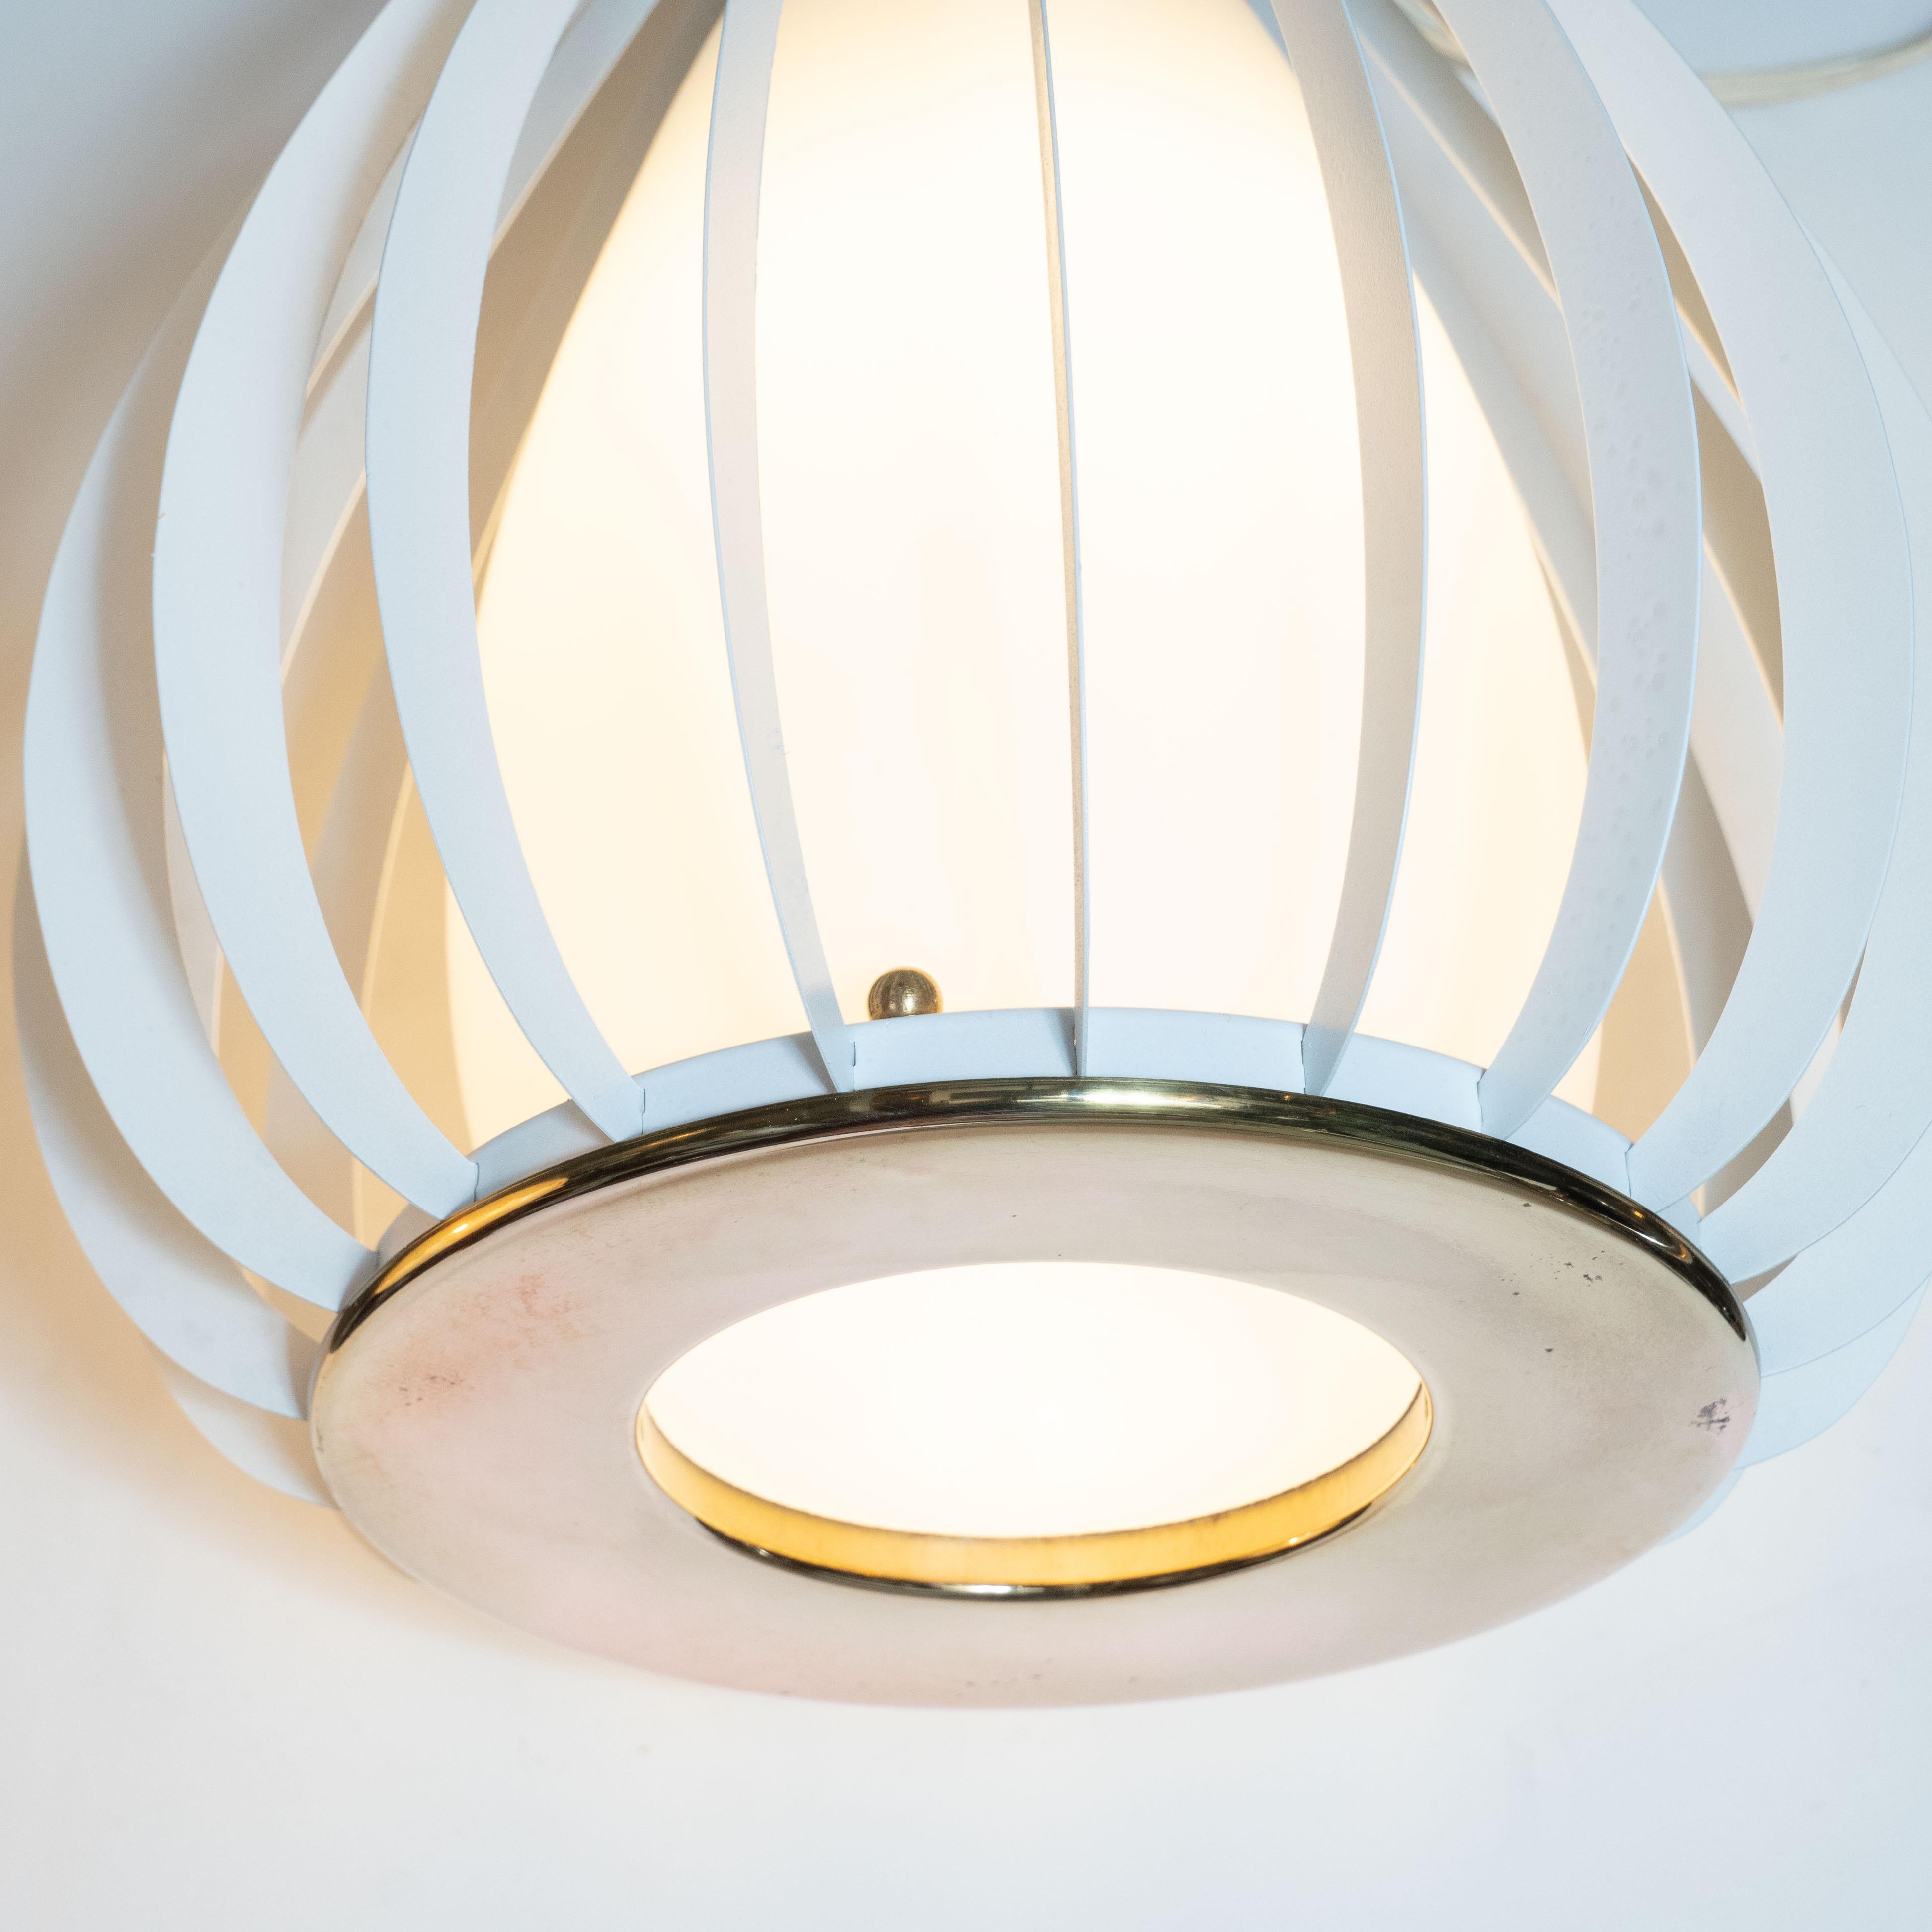 This refined and graphic Mid-Century Modern lantern chandelier was realized in Italy, circa 1960. It features an amorphic ovoid form shade in frosted glass that rests in between two circular brass supports with cutout centers. An abundance of